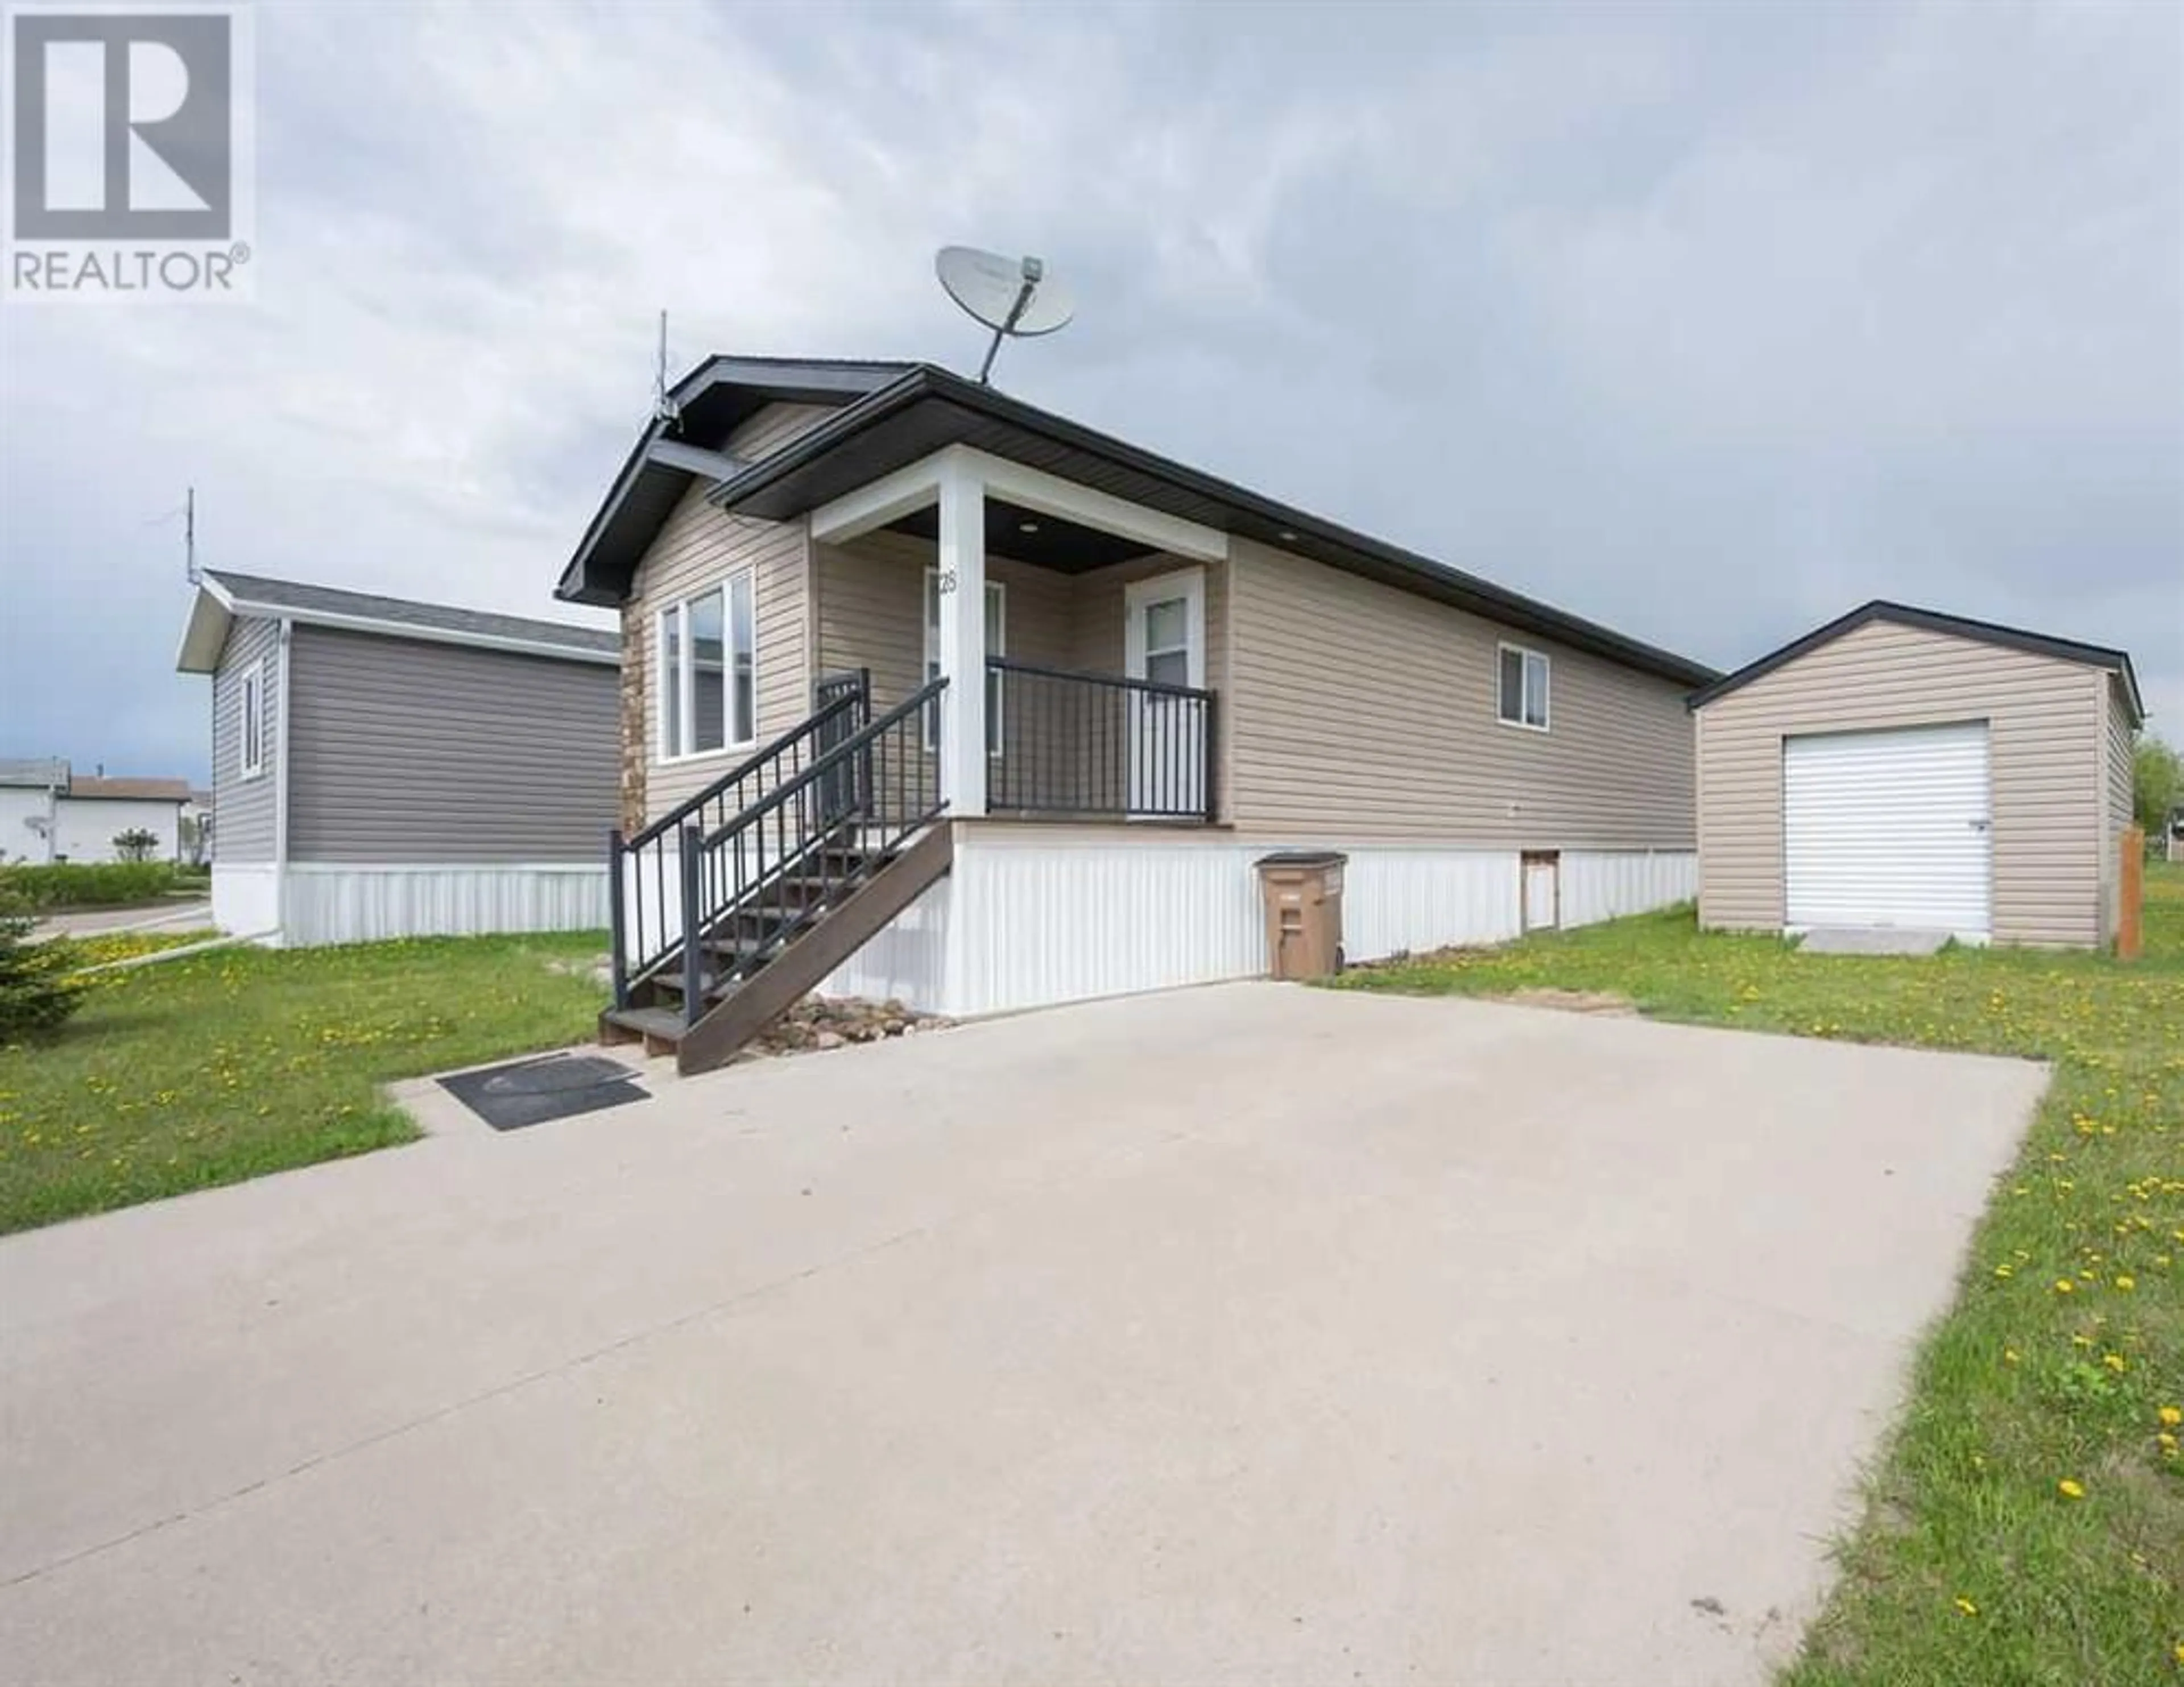 Home with vinyl exterior material for 28 Aspen Drive, Athabasca Alberta T9S1T4